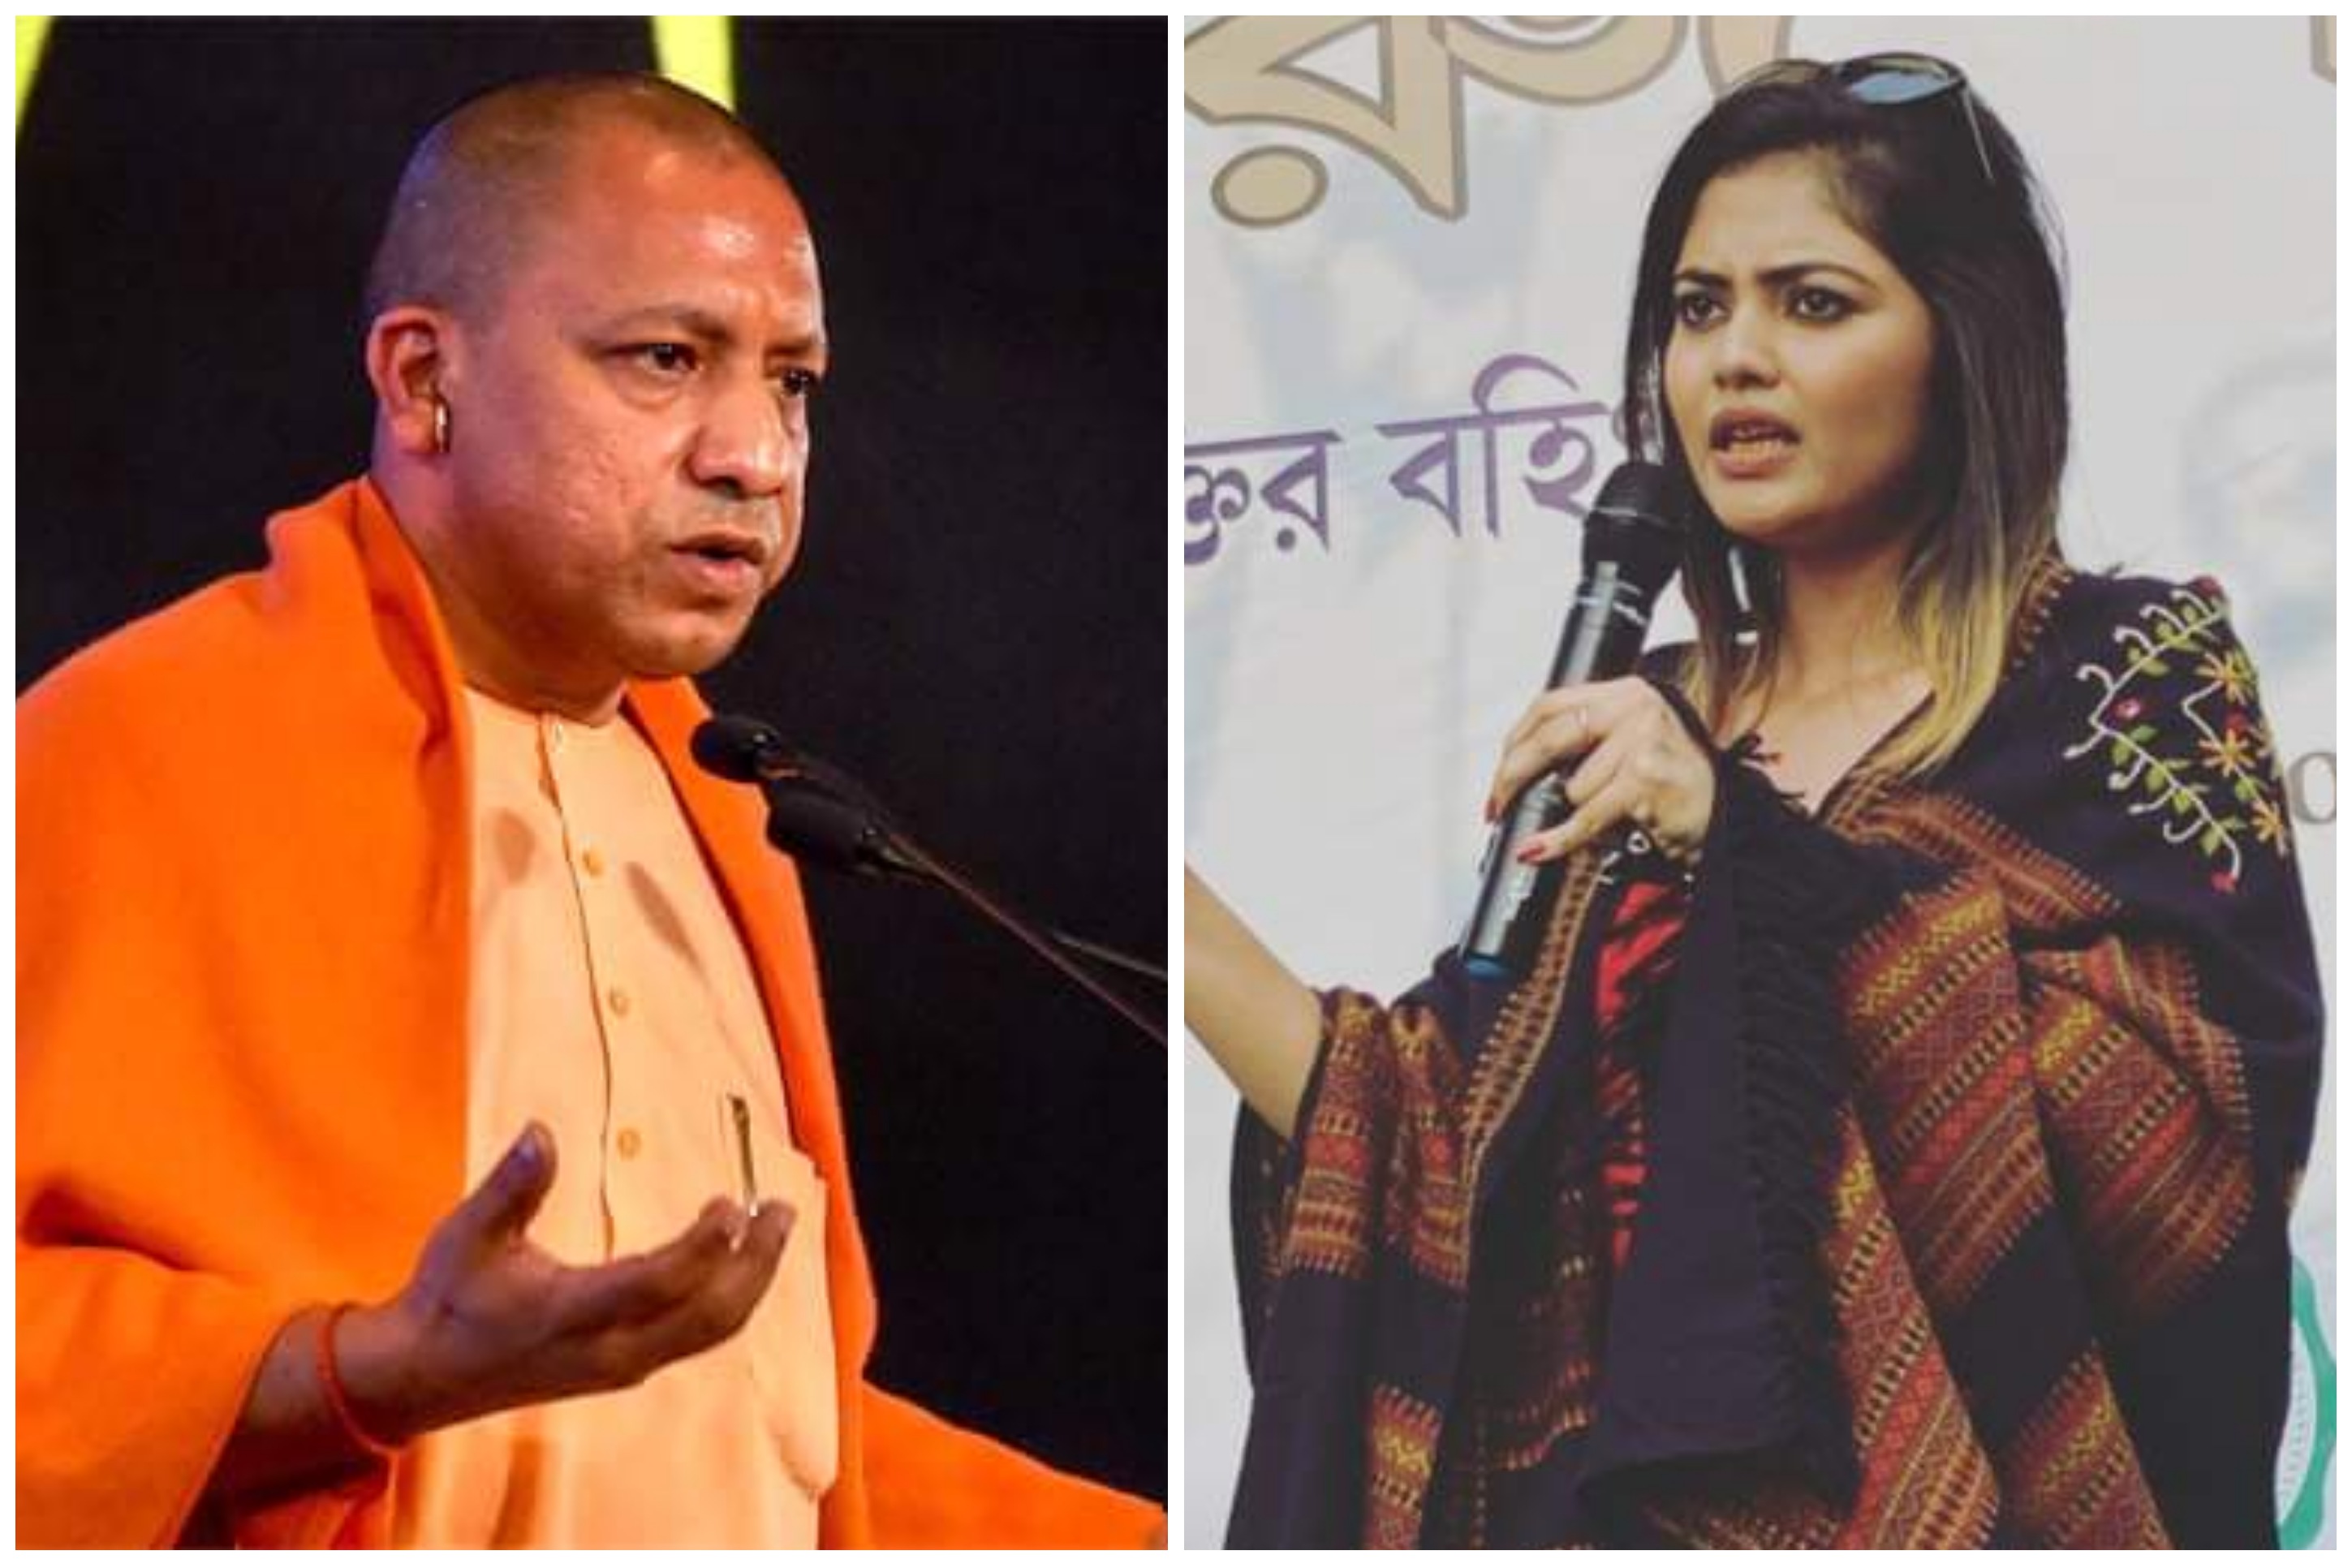 TMC’s Saayoni Ghosh attacks Yogi Adityanath on questions of women safety in West Bengal